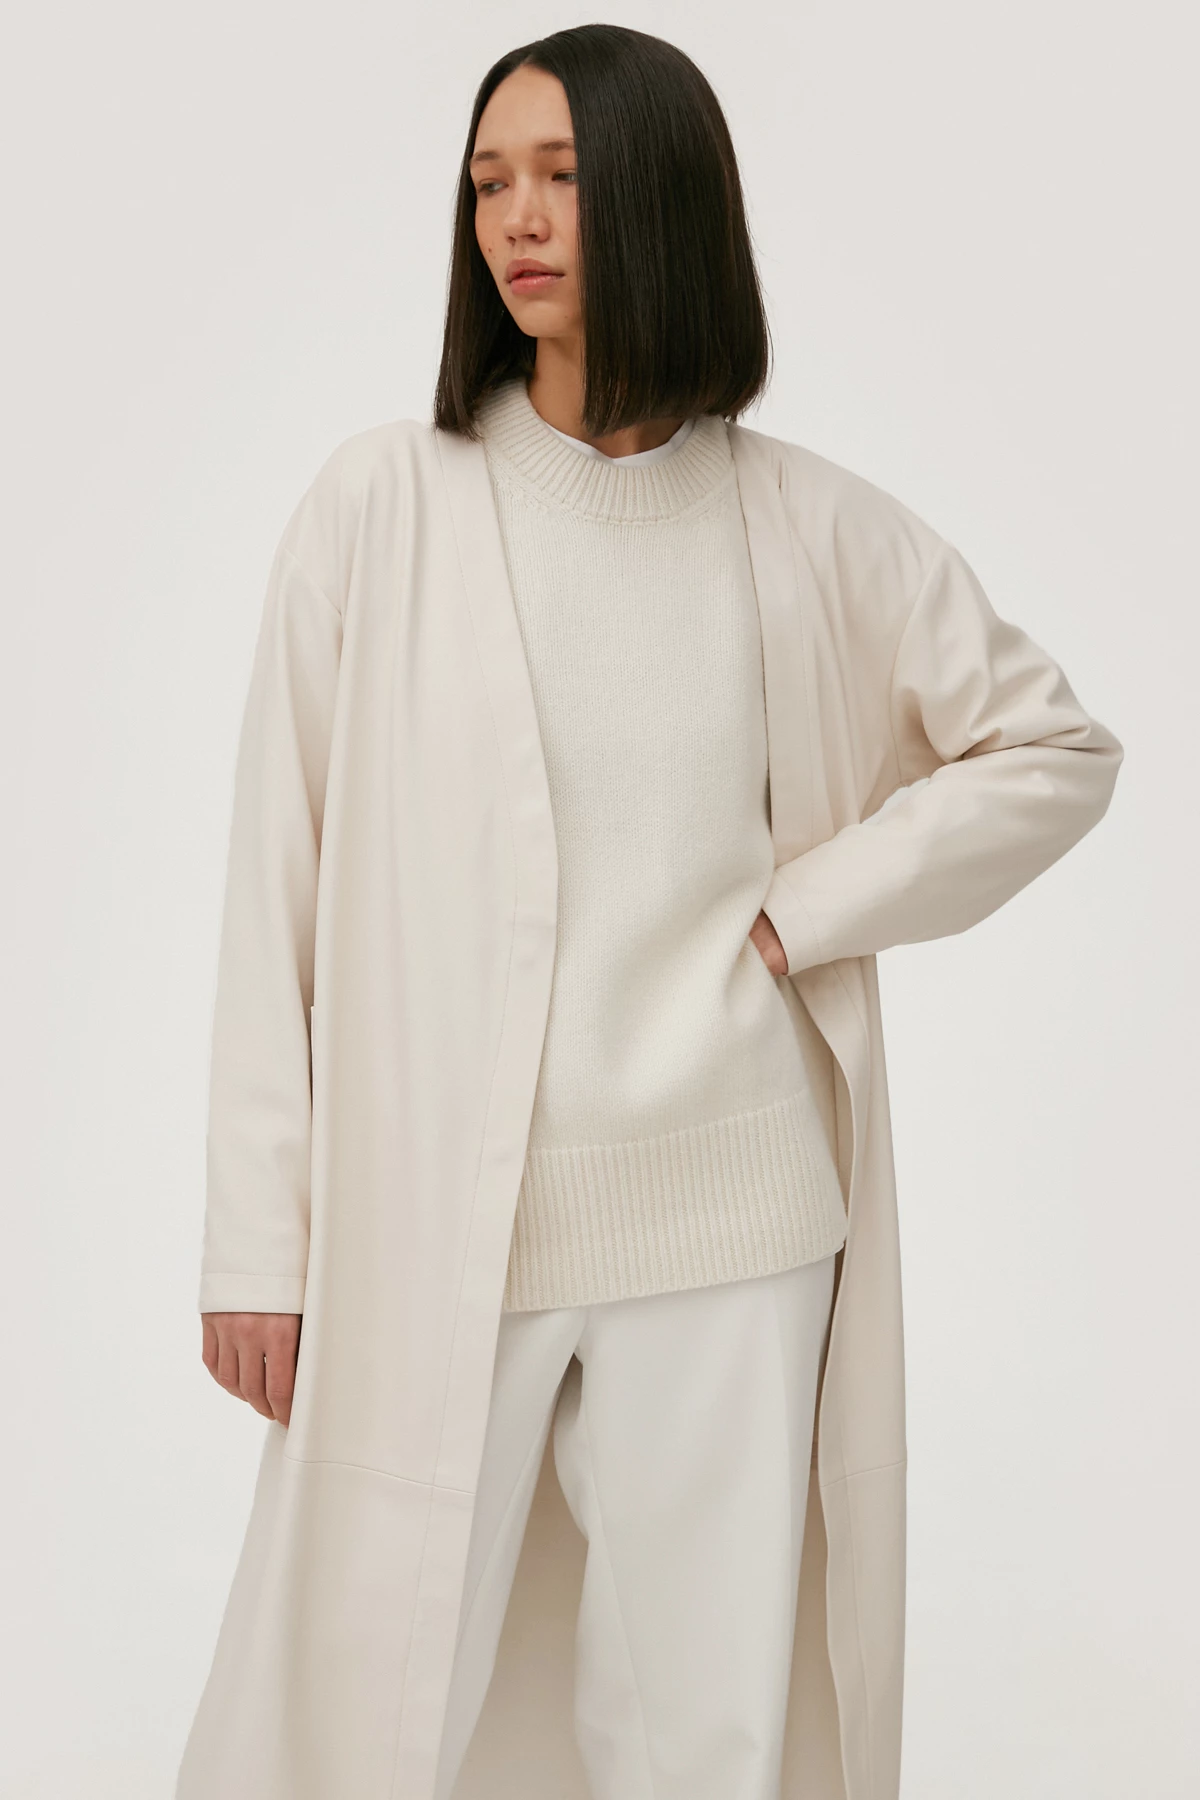 Cashmere milky loose-fit sweater, photo 6